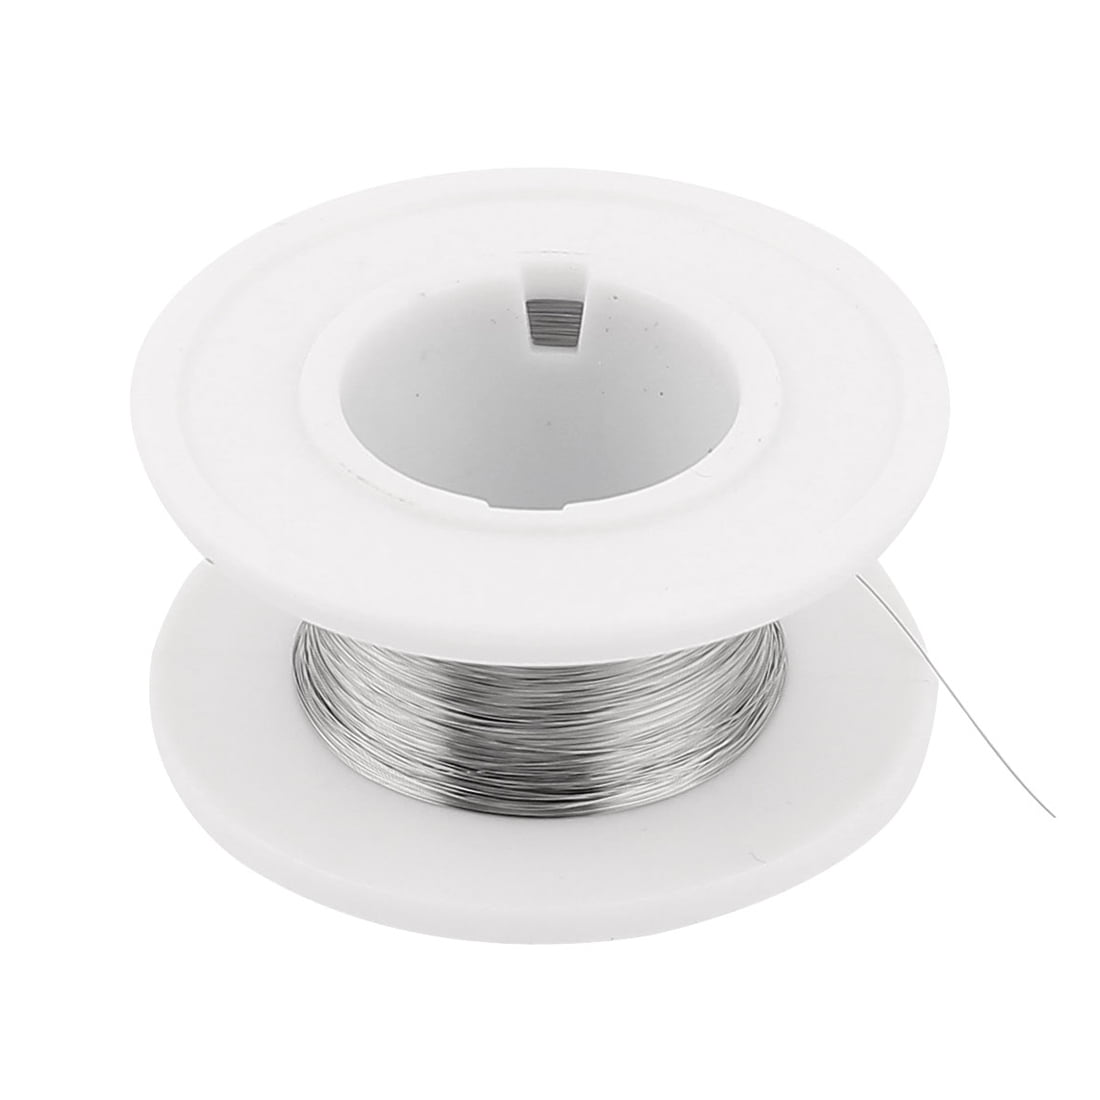 Nichrome 80 Rond 0.2 mm 33 AWG 25 m Roll 34.7Ohm/m Heater Wire 